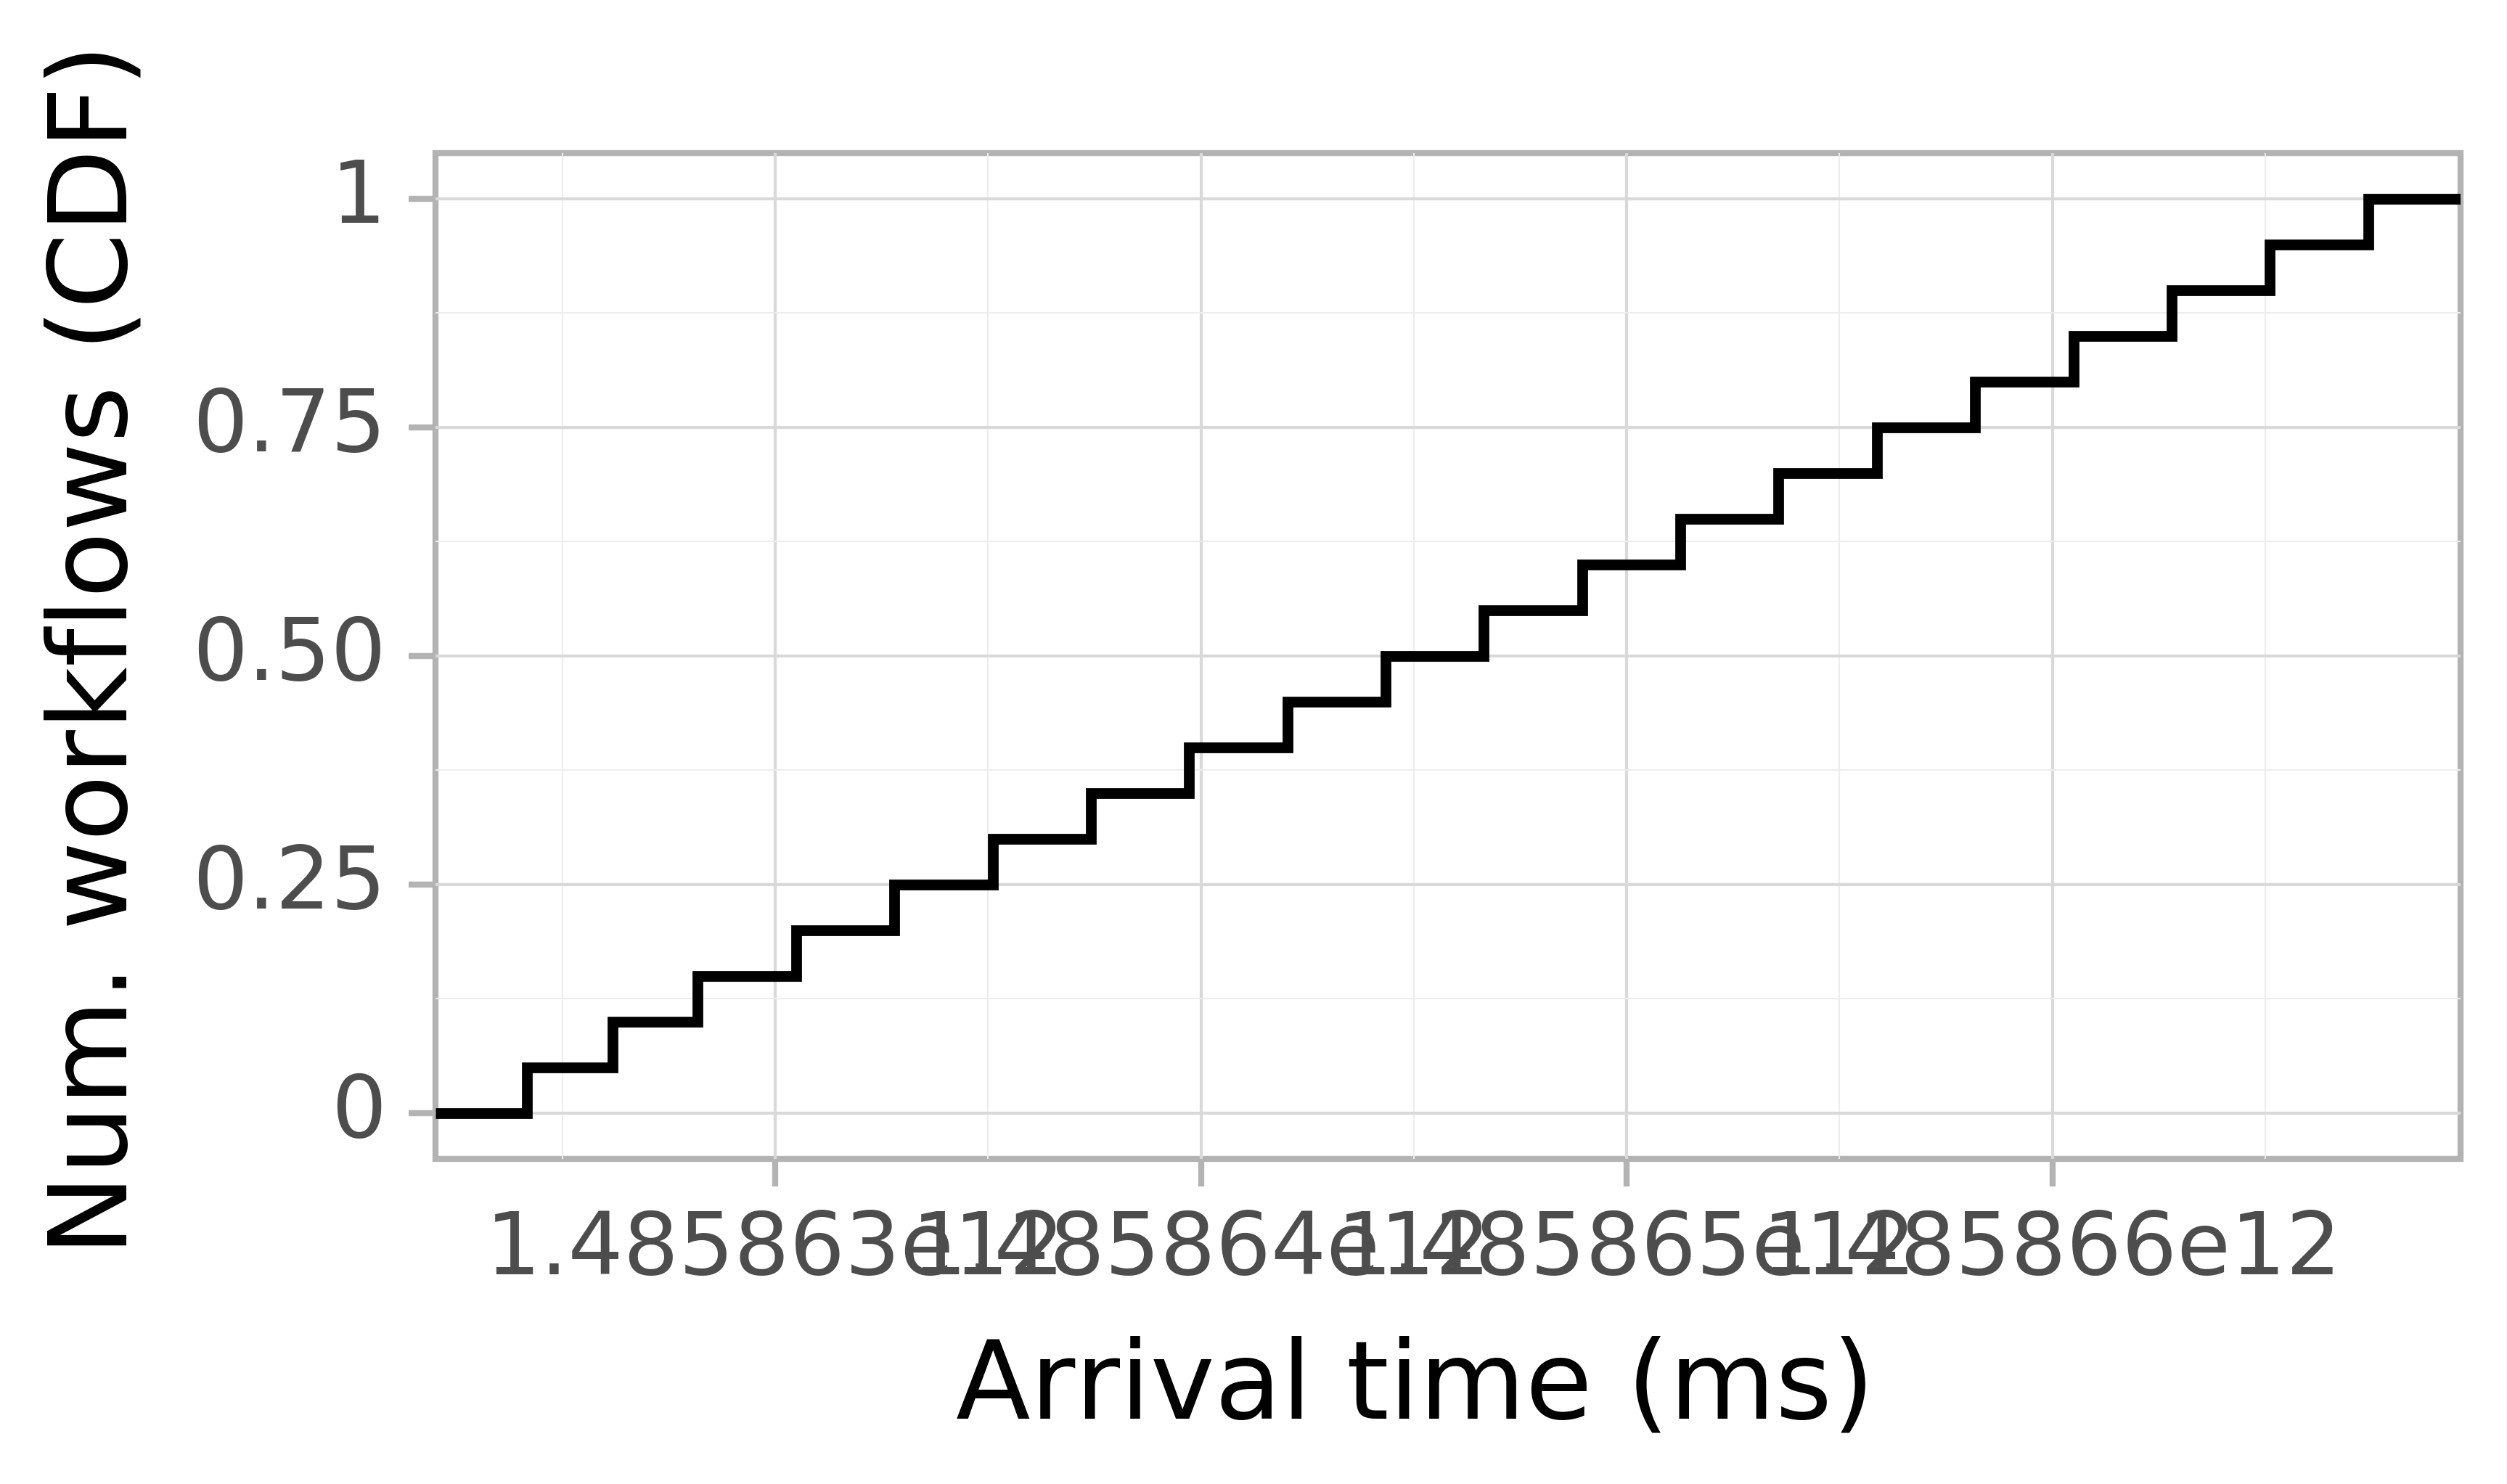 Job arrival CDF graph for the askalon-new_ee22 trace.